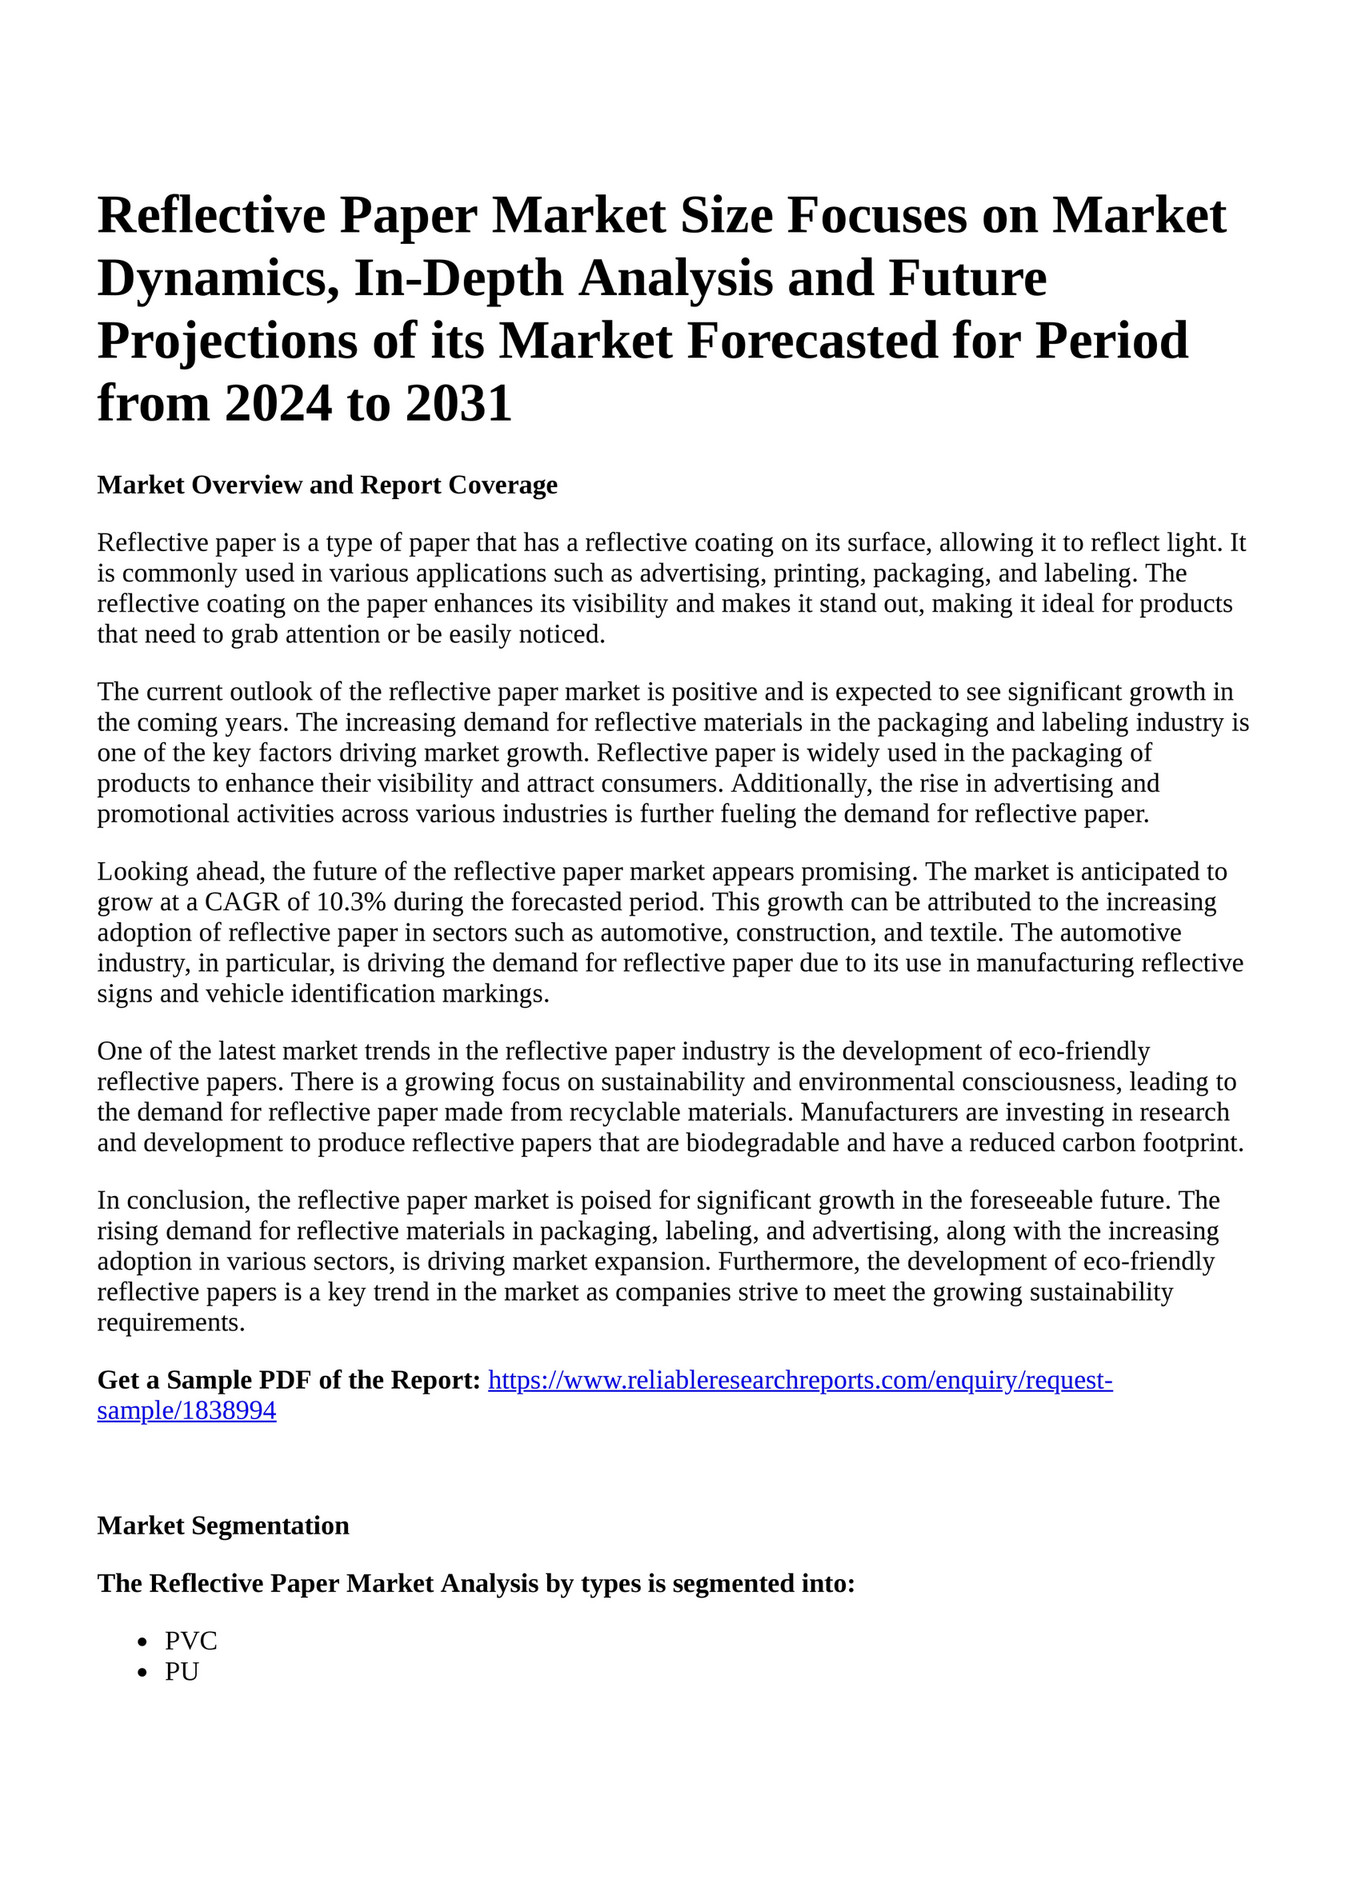 Reportprime - Reflective Paper Market Size Focuses on Market Dynamics,  In-Depth Analysis and Future Projections of its Market Forecasted for  Period from 2024 to 2031 - Page 2-3